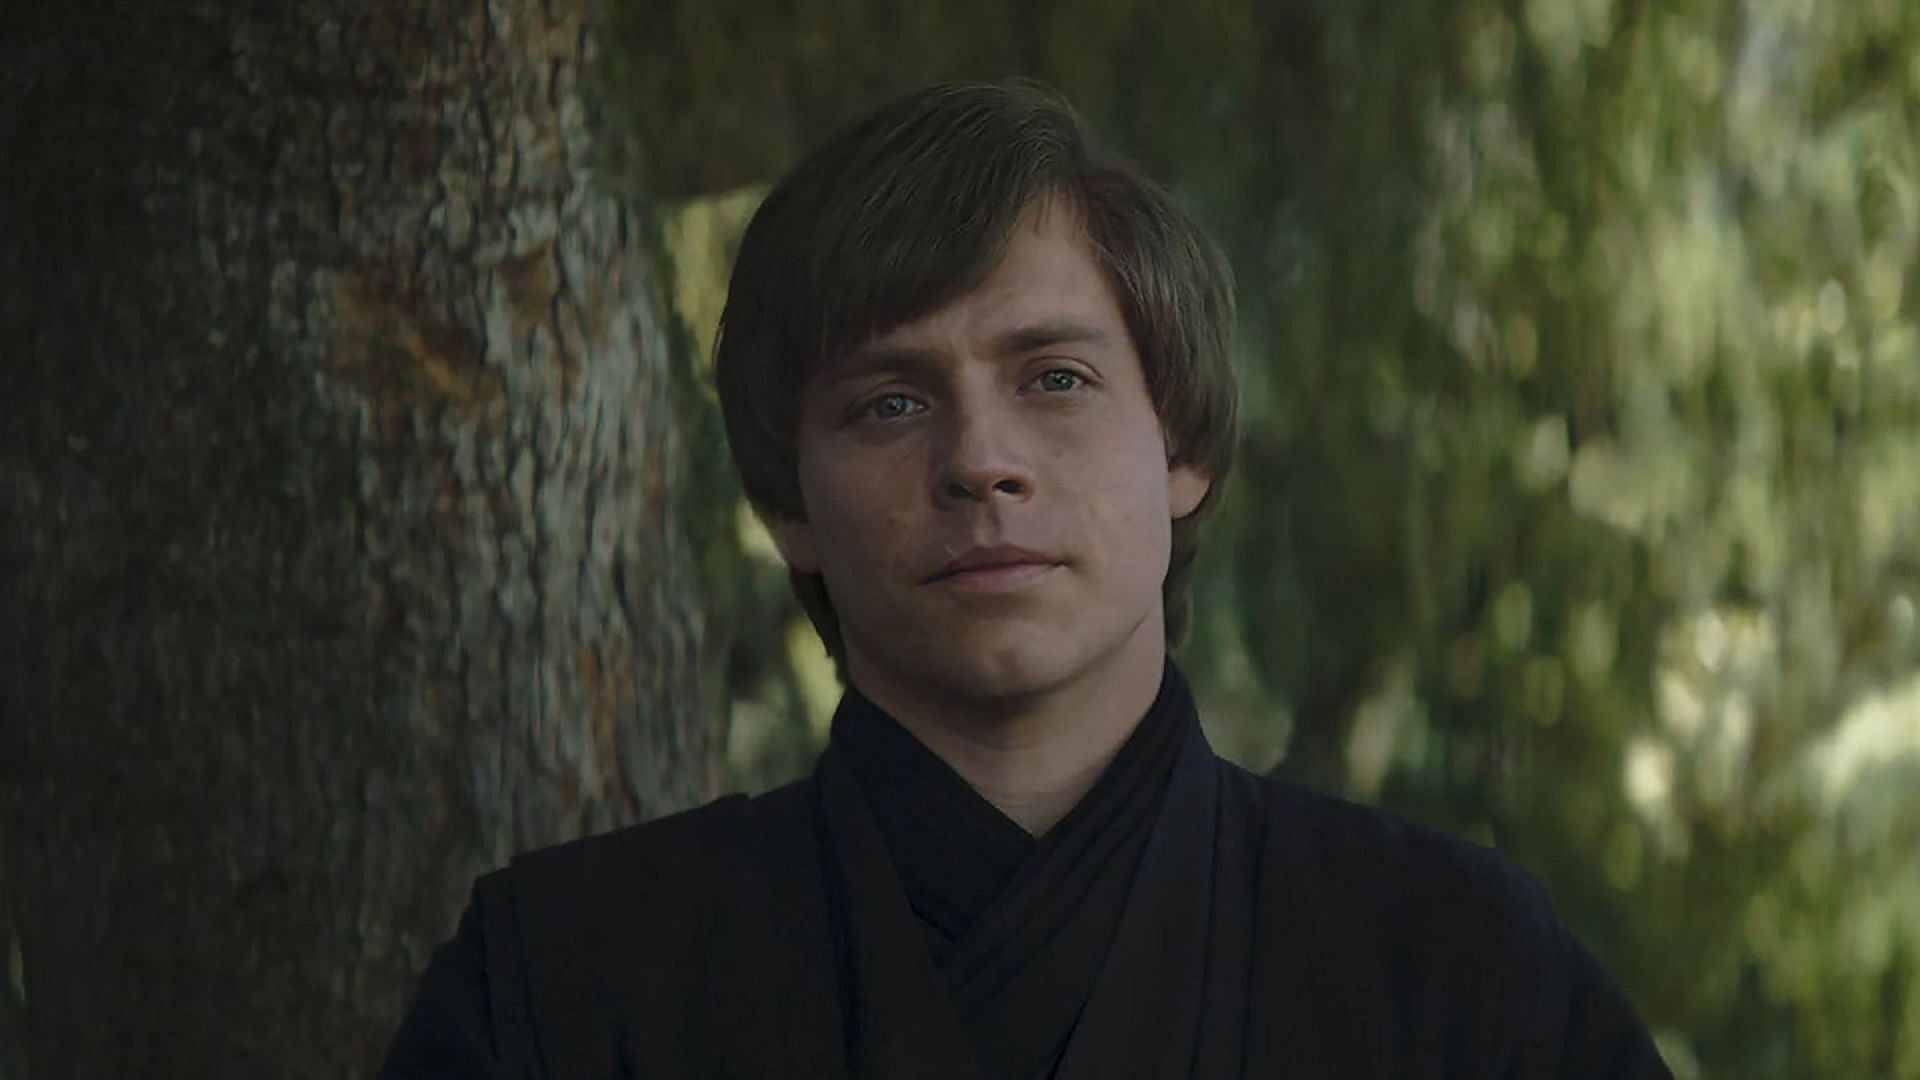 Discovering a new dimension: The exploration of Luke Skywalker